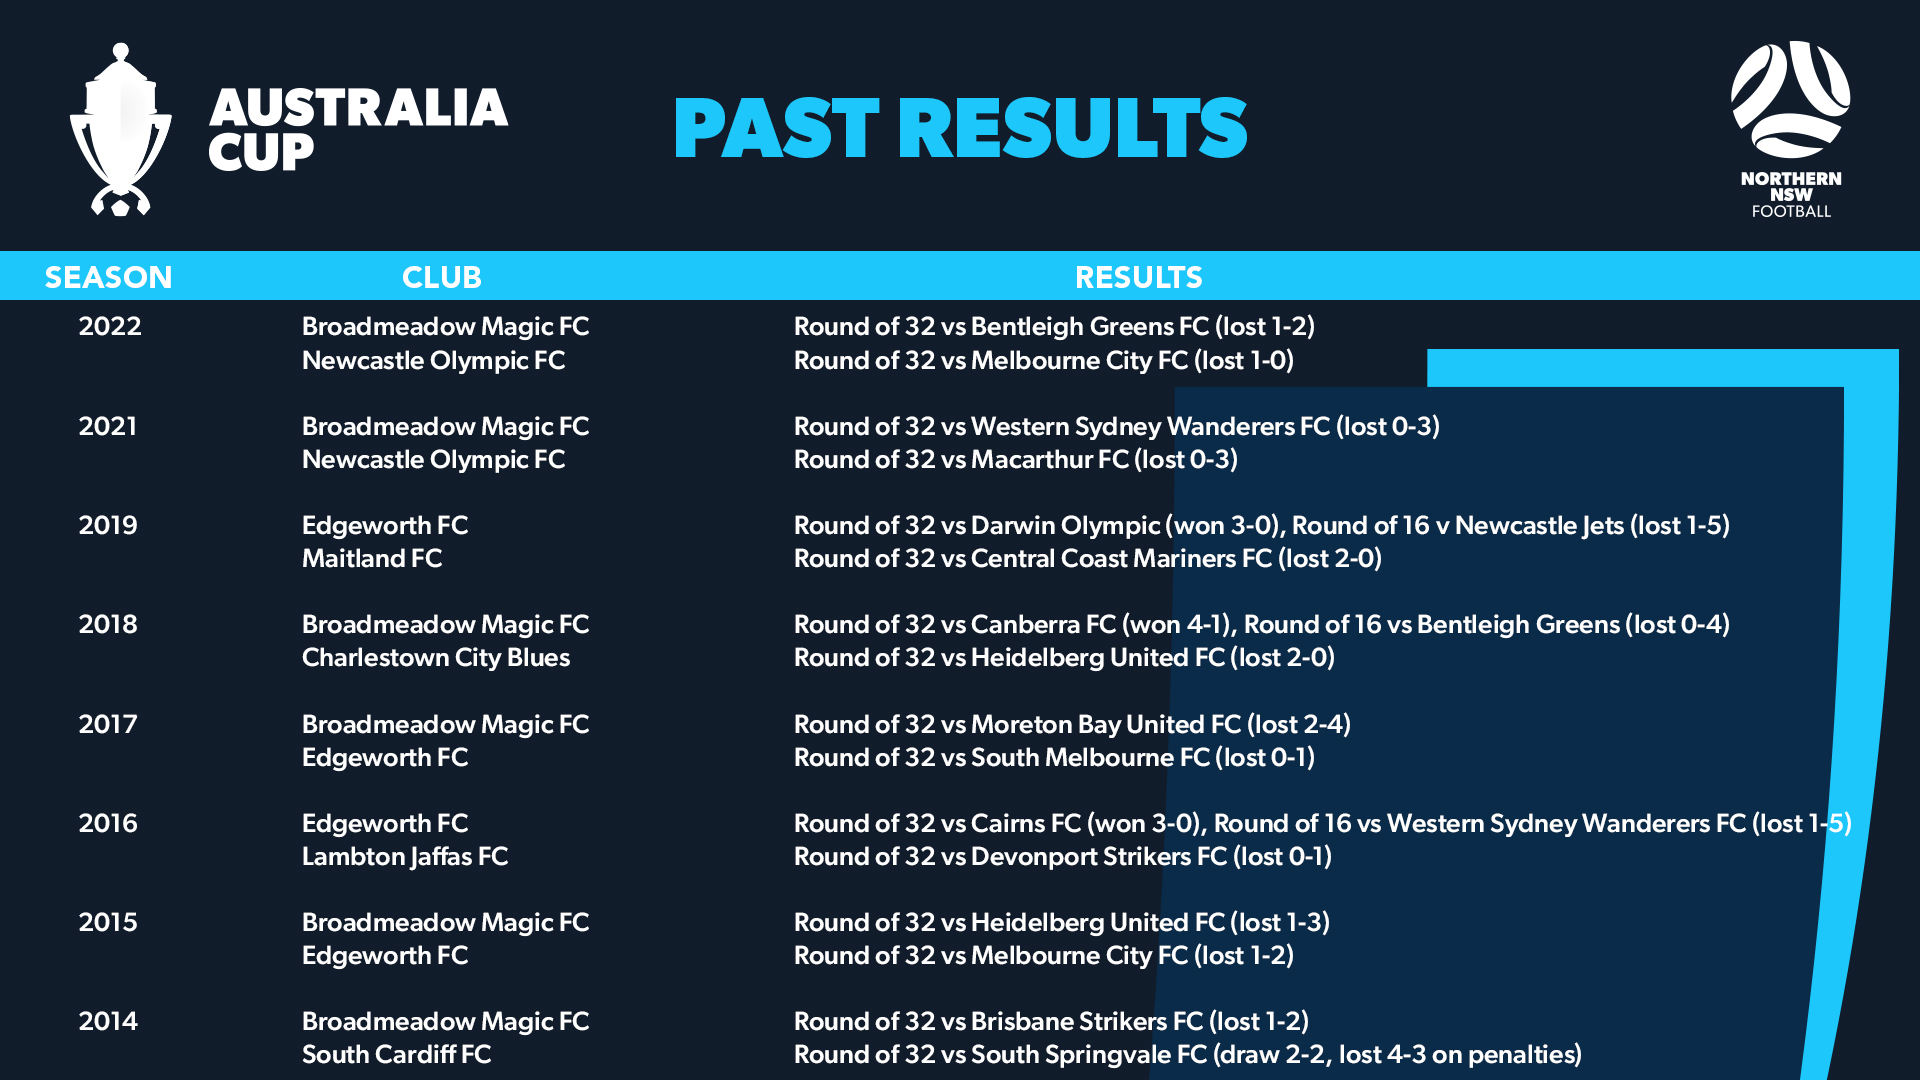 Australia Cup Past Results